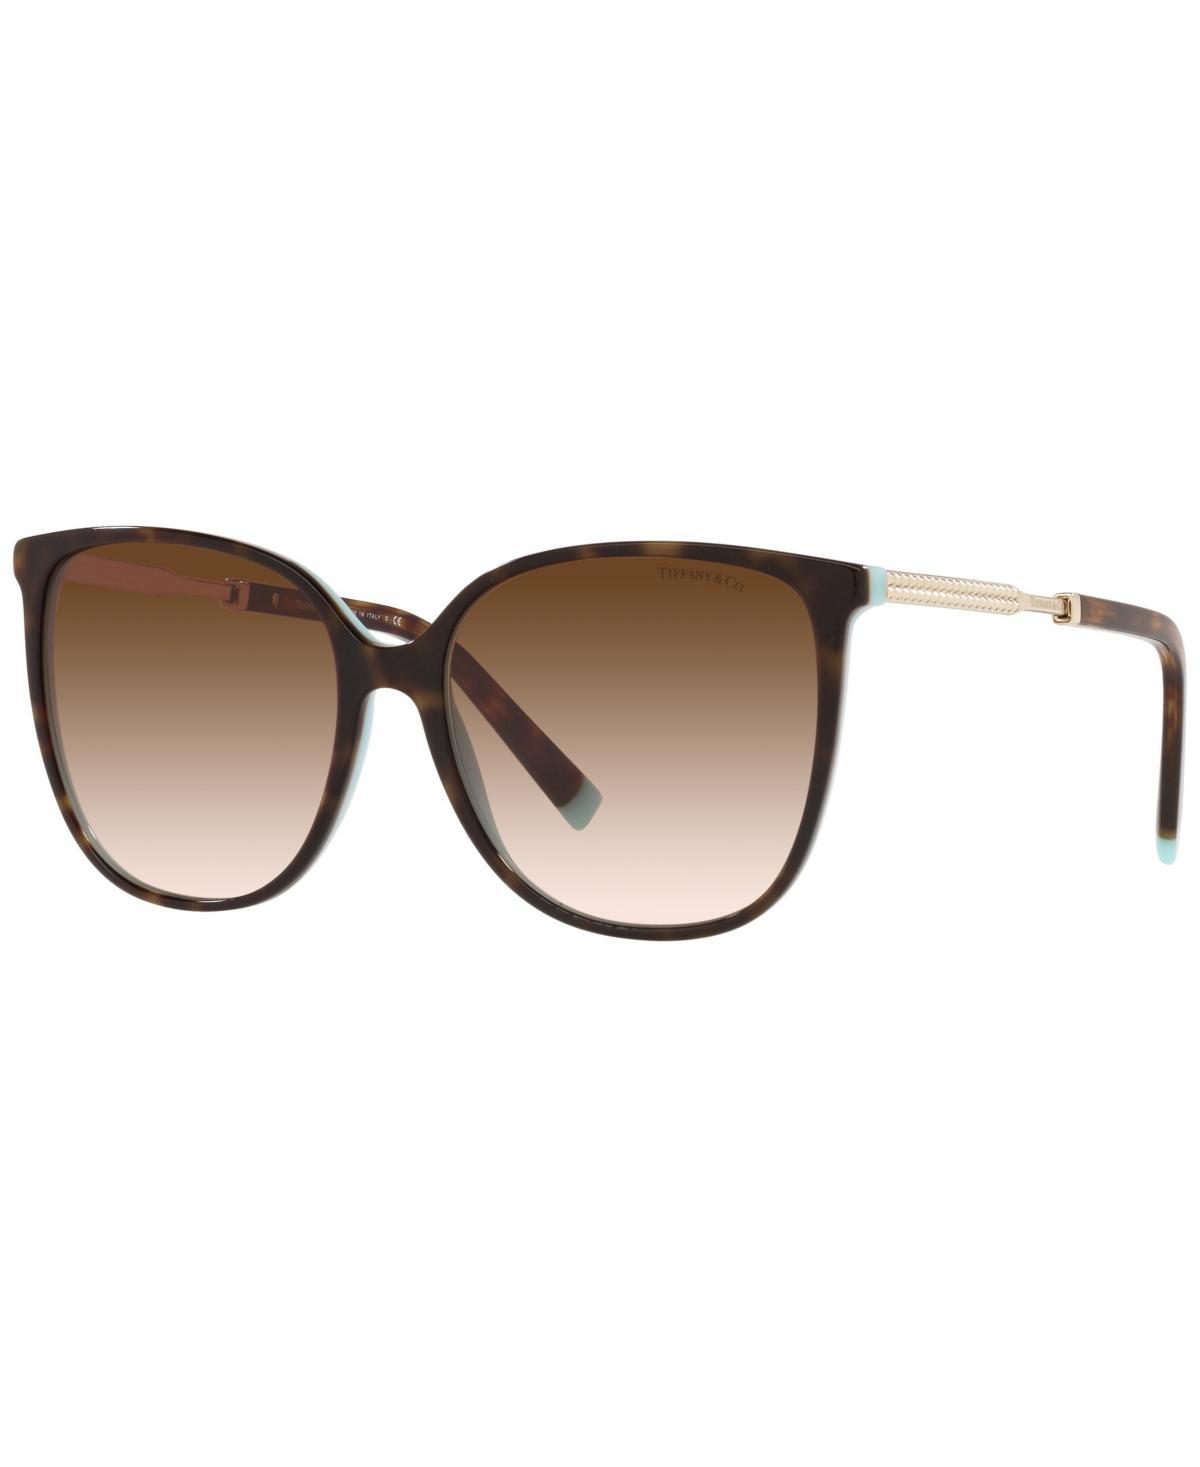 Tory Burch 58mm Square Sunglasses Product Image